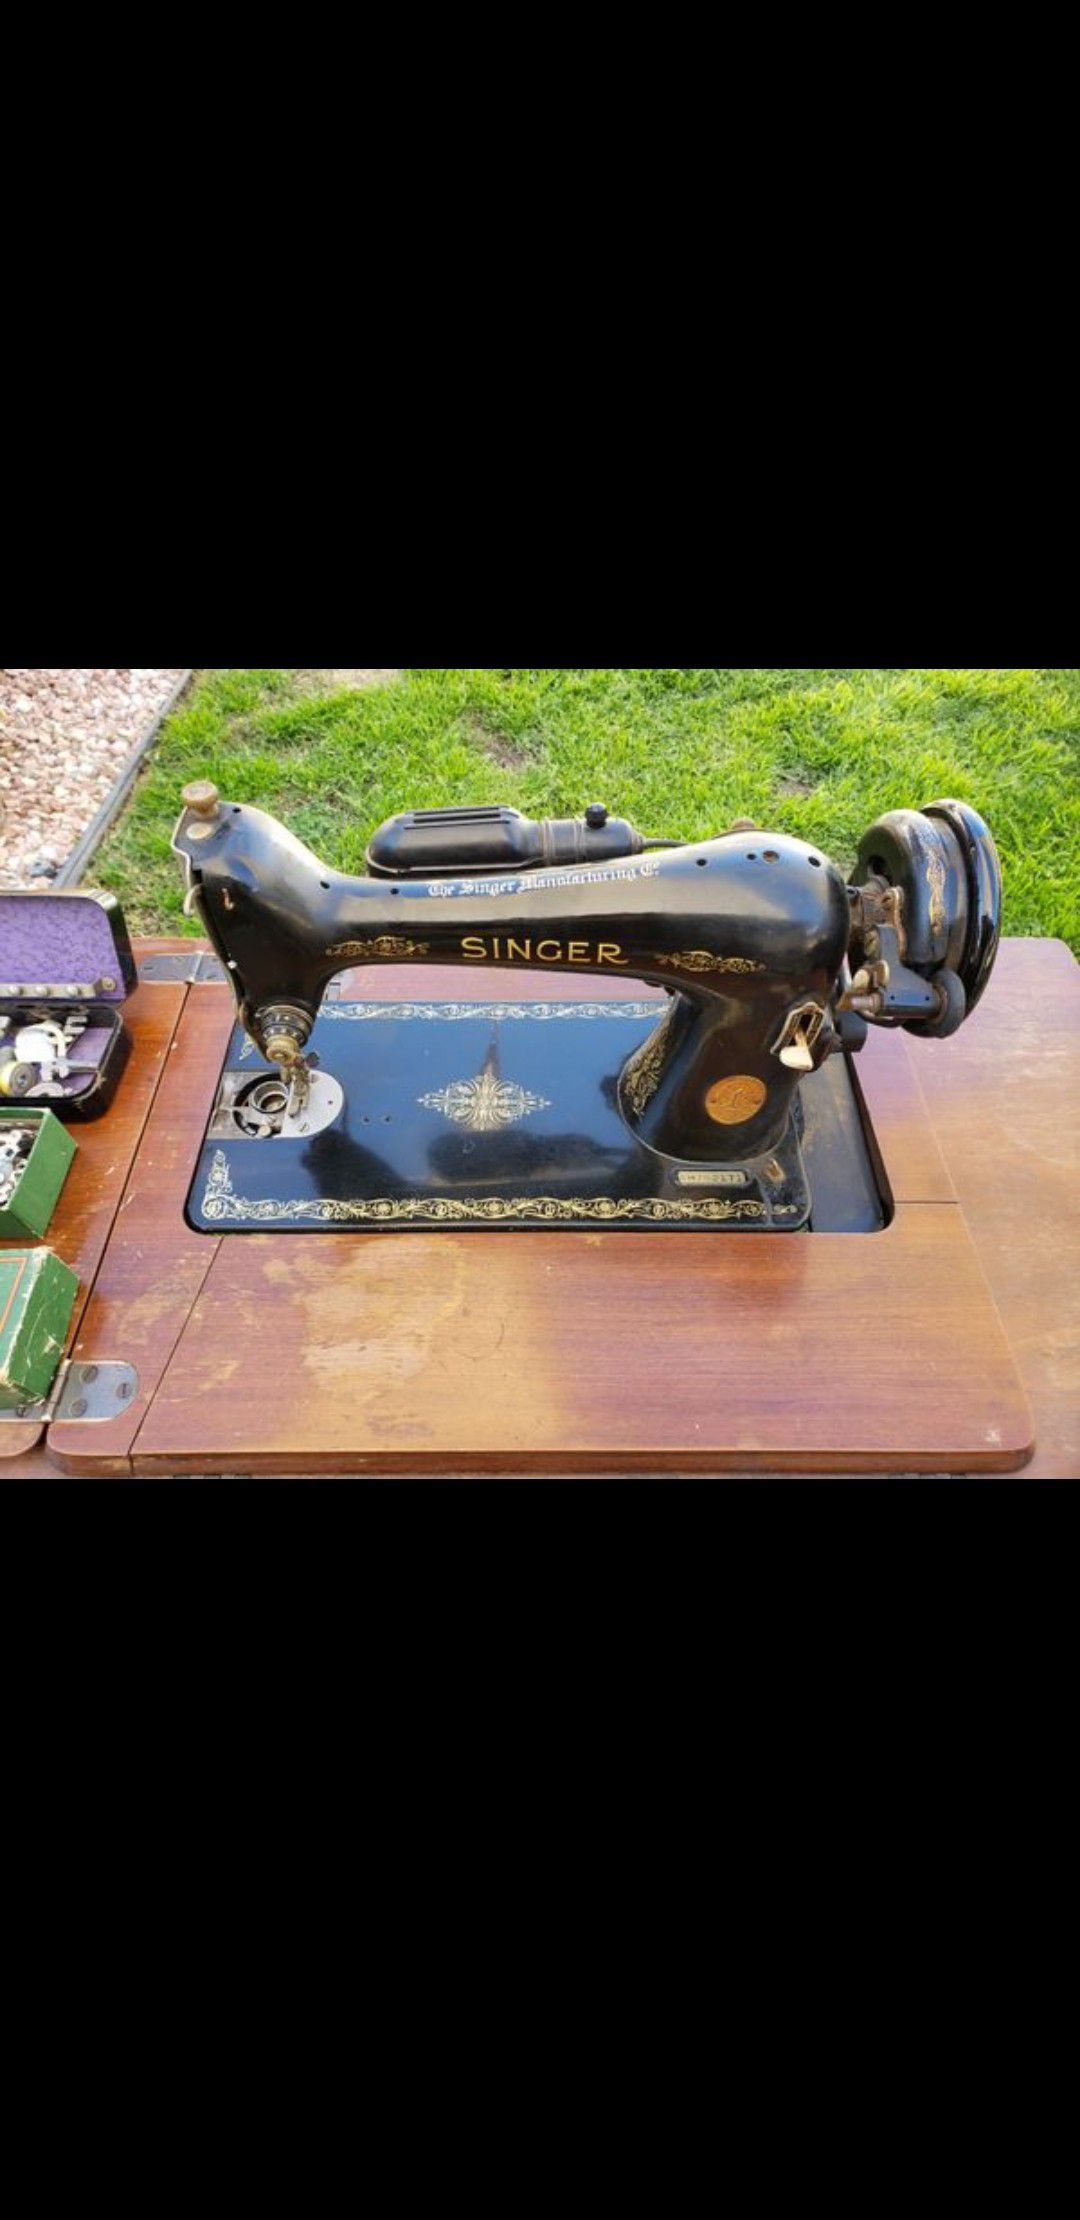 Singer sewing machine and work table Antique collectors item 1948